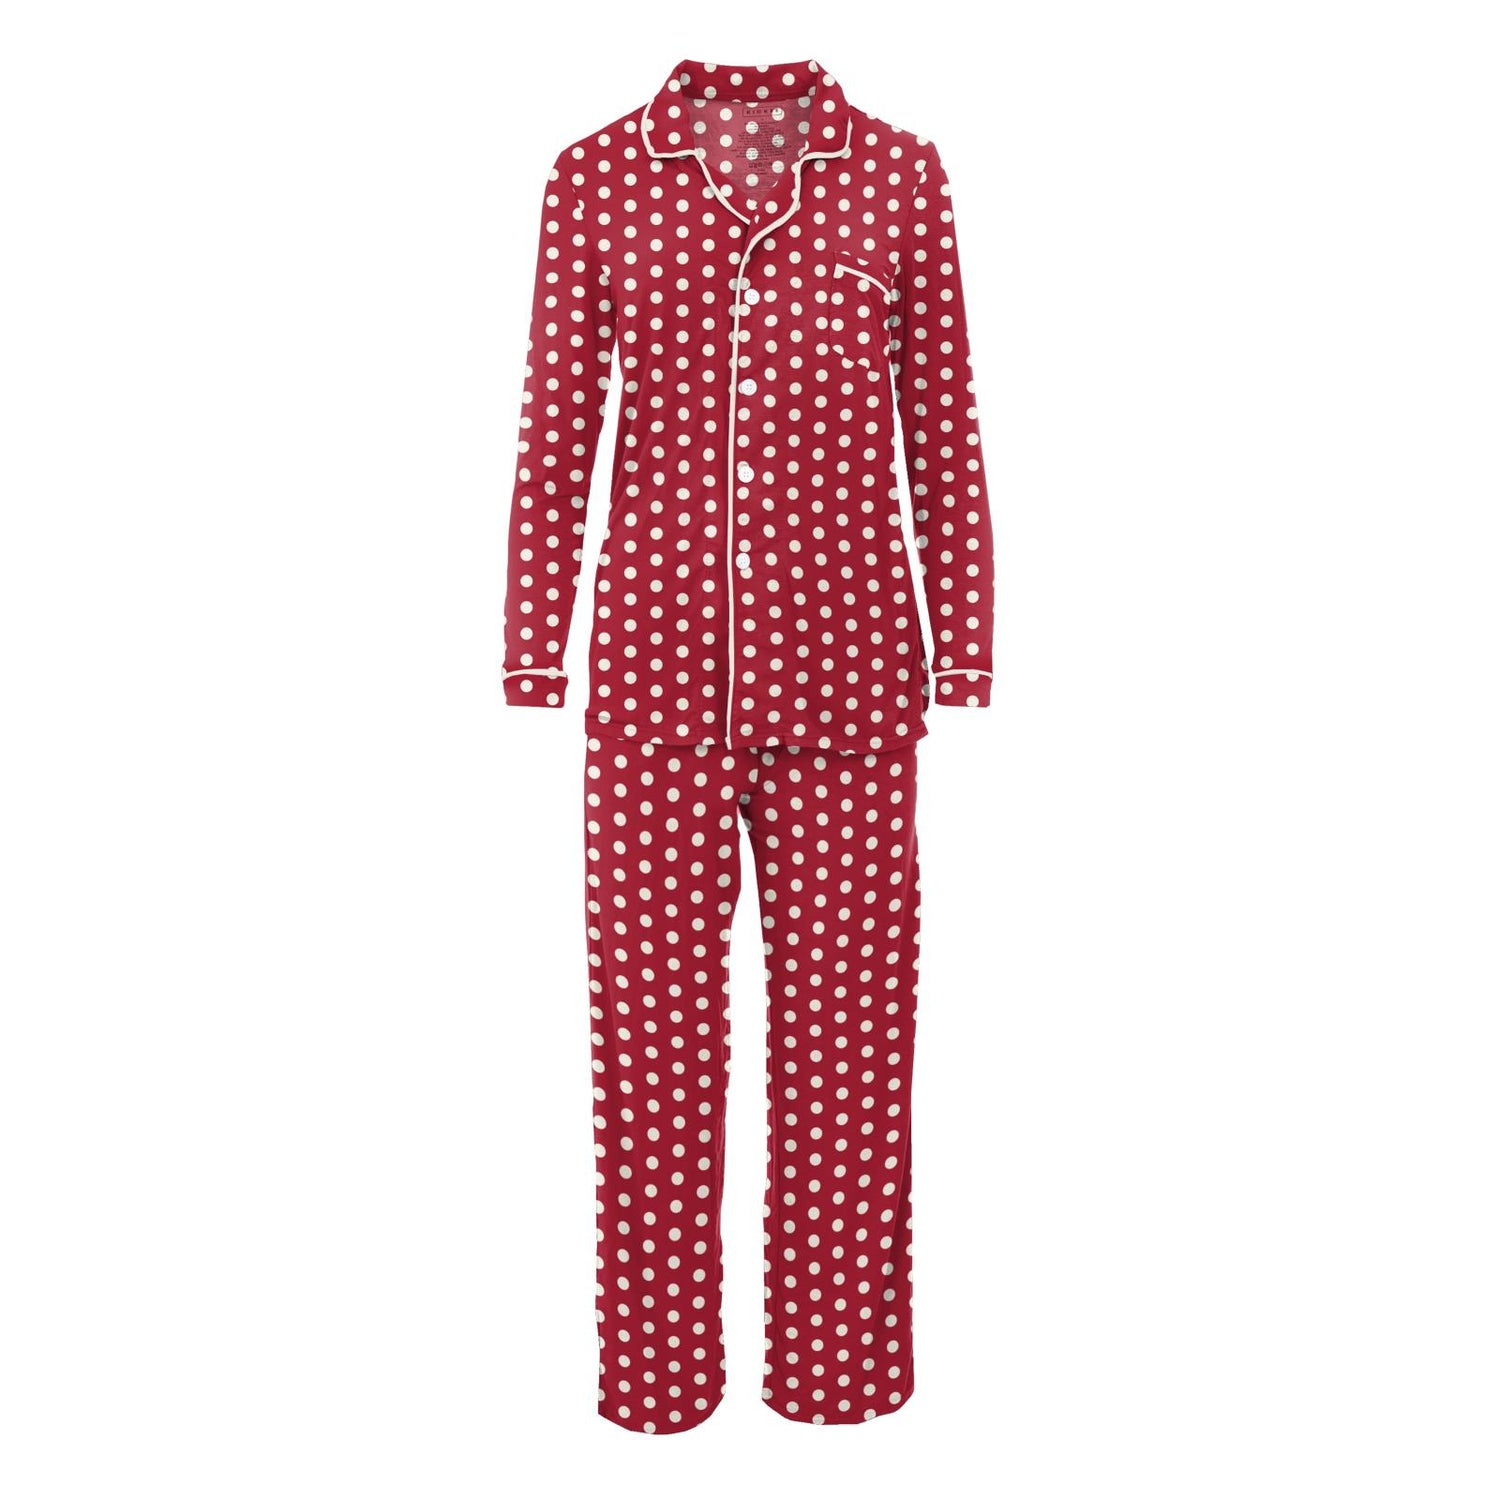 Women's Print Long Sleeve Collared Pajama Set in Candy Apple Polka Dots